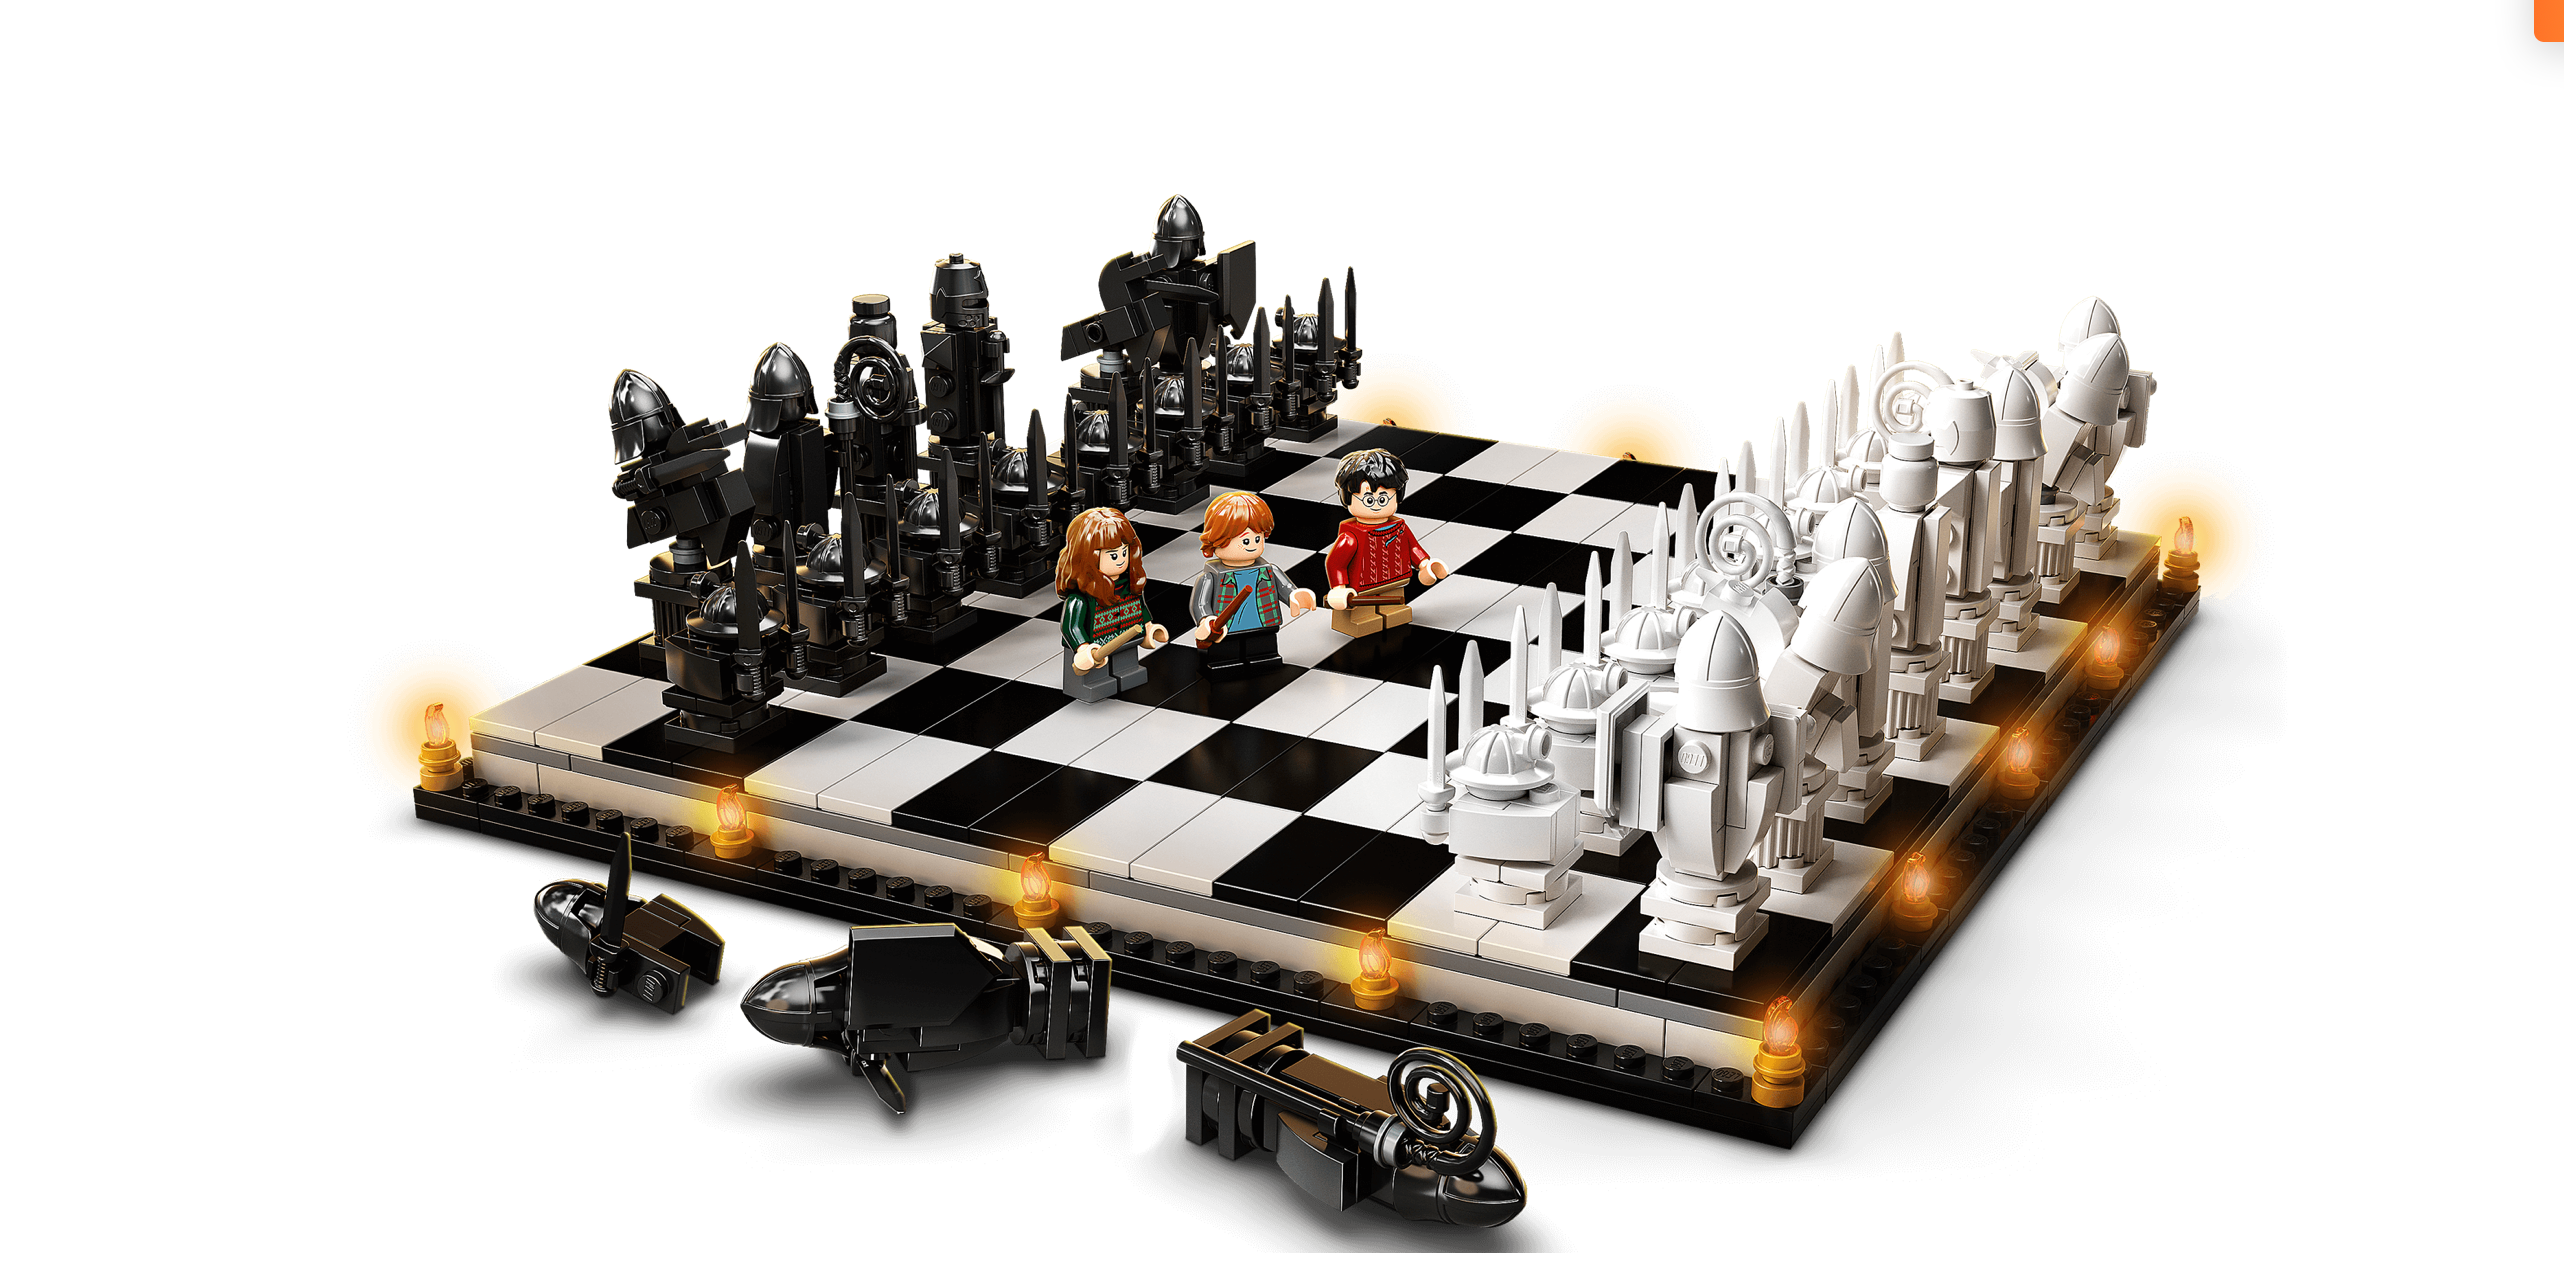 Wizards Chess Board Harry Potter LEGO